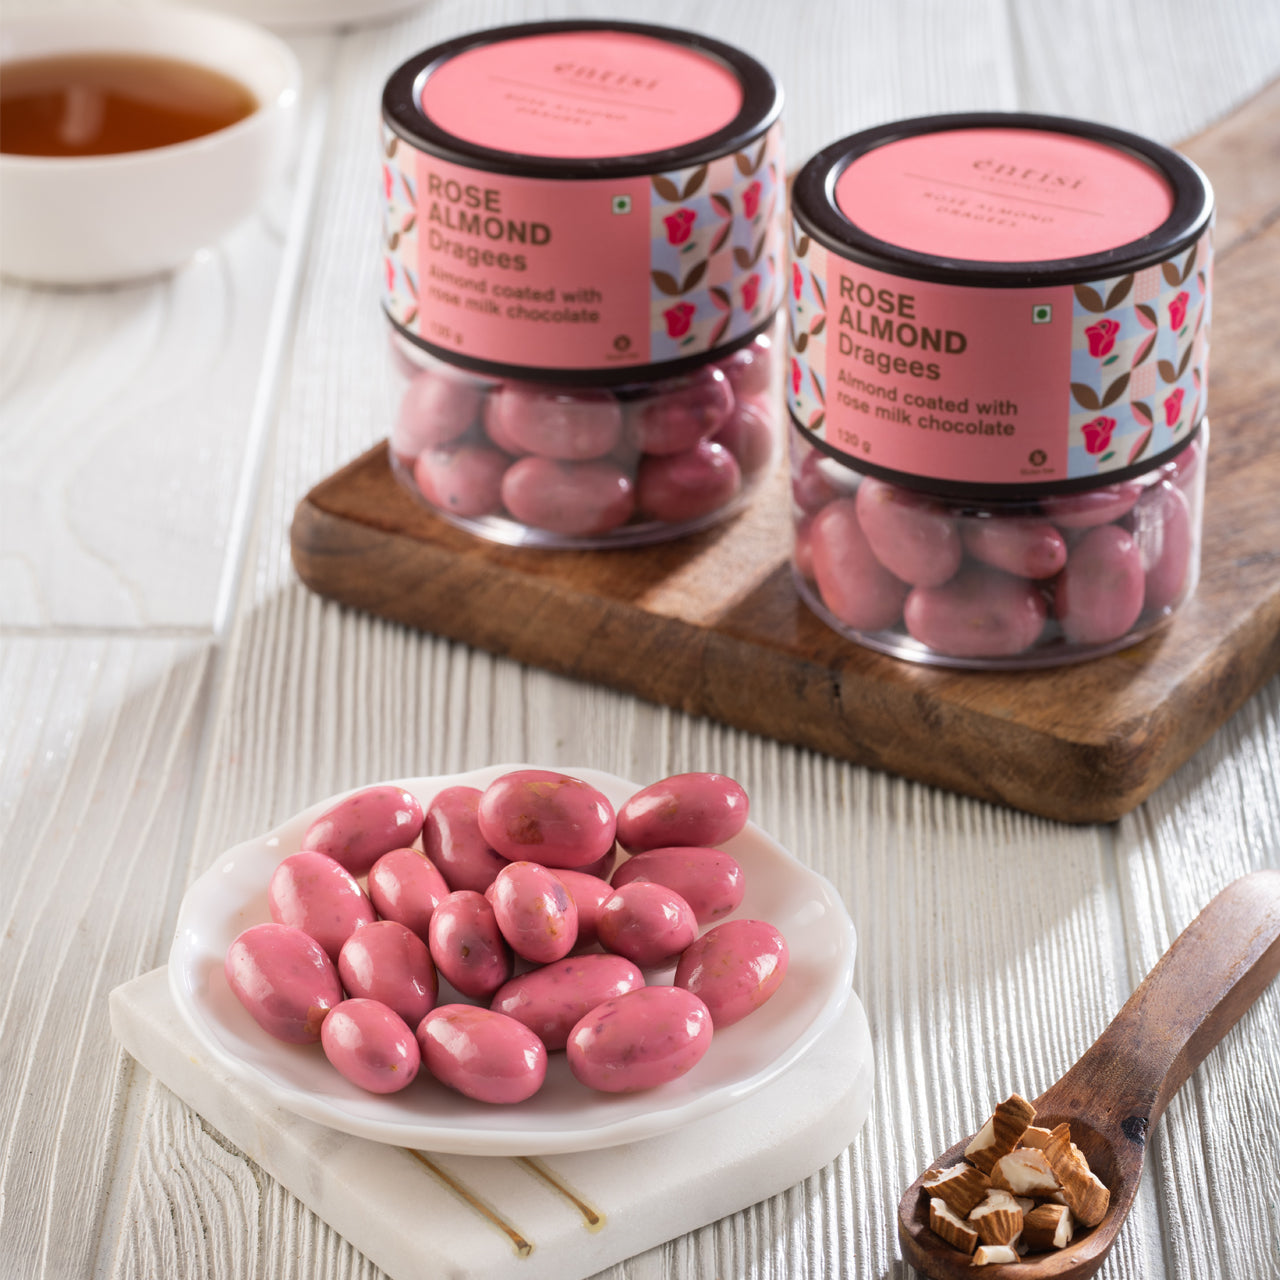 Entisi - Chocolate coated Rose Almonds Dragees Jar